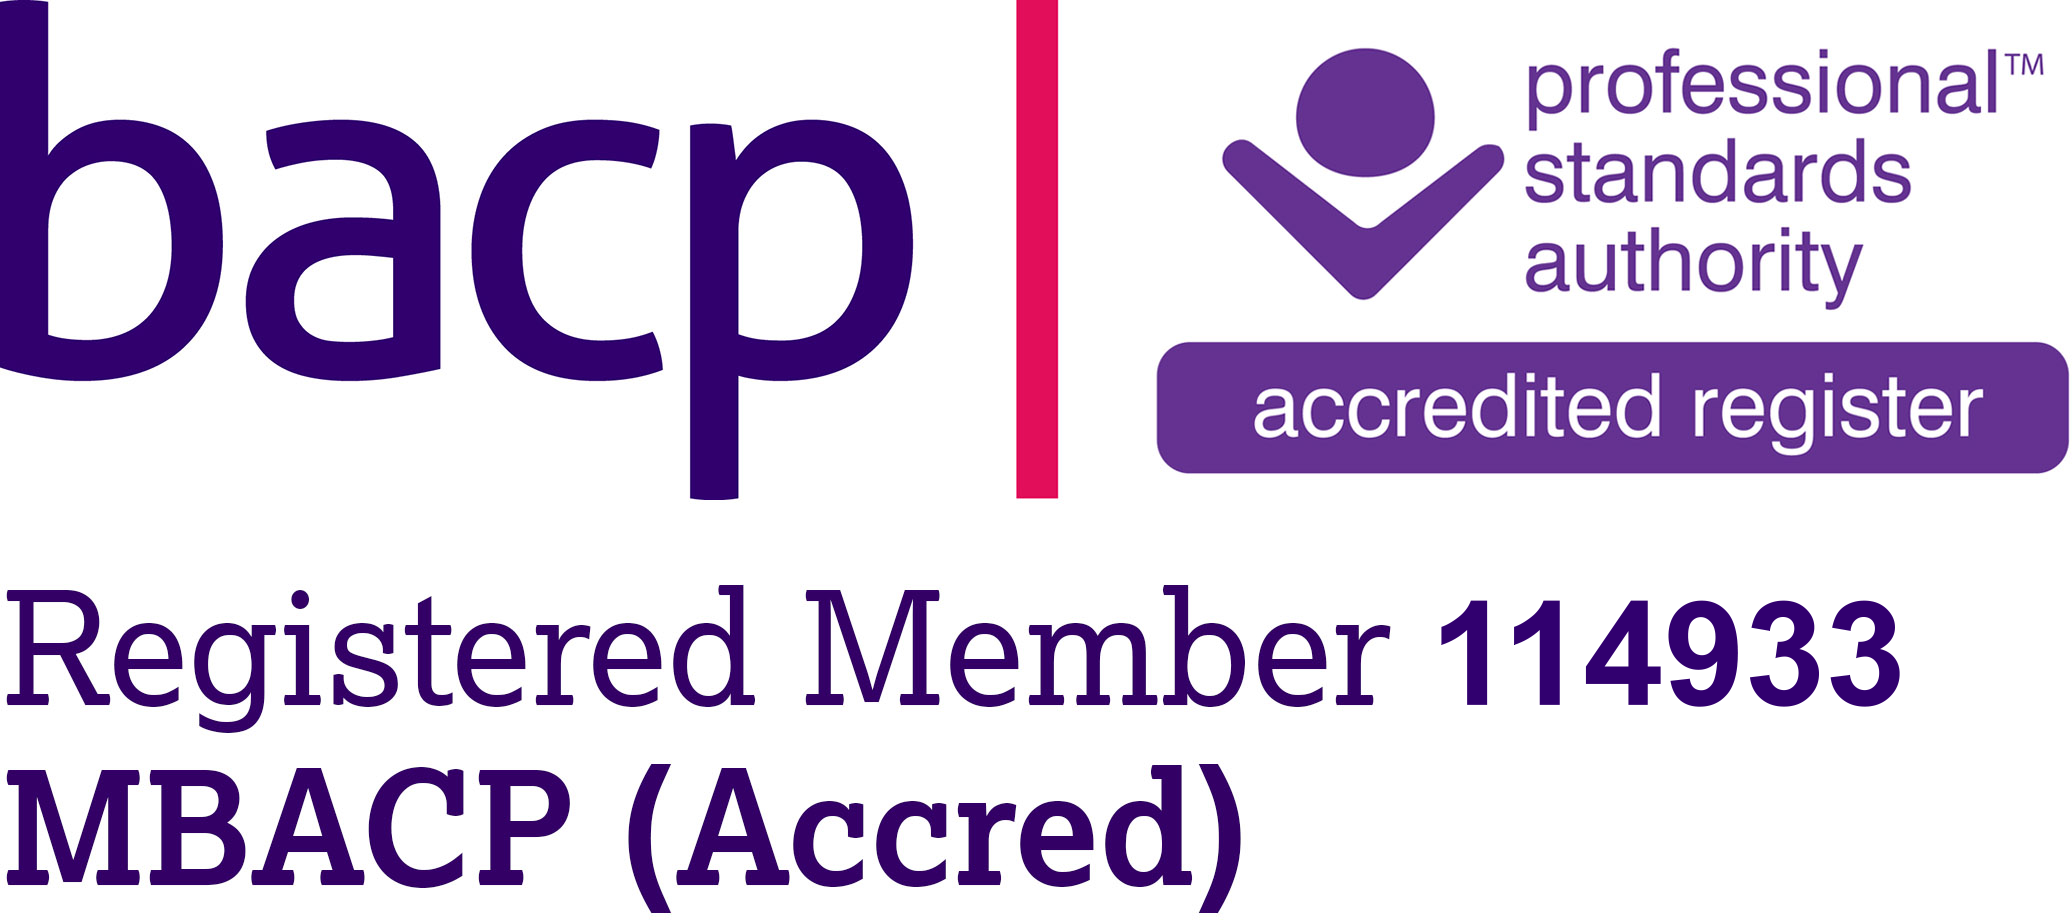 BACP Registration Logo Accredited Member 114933